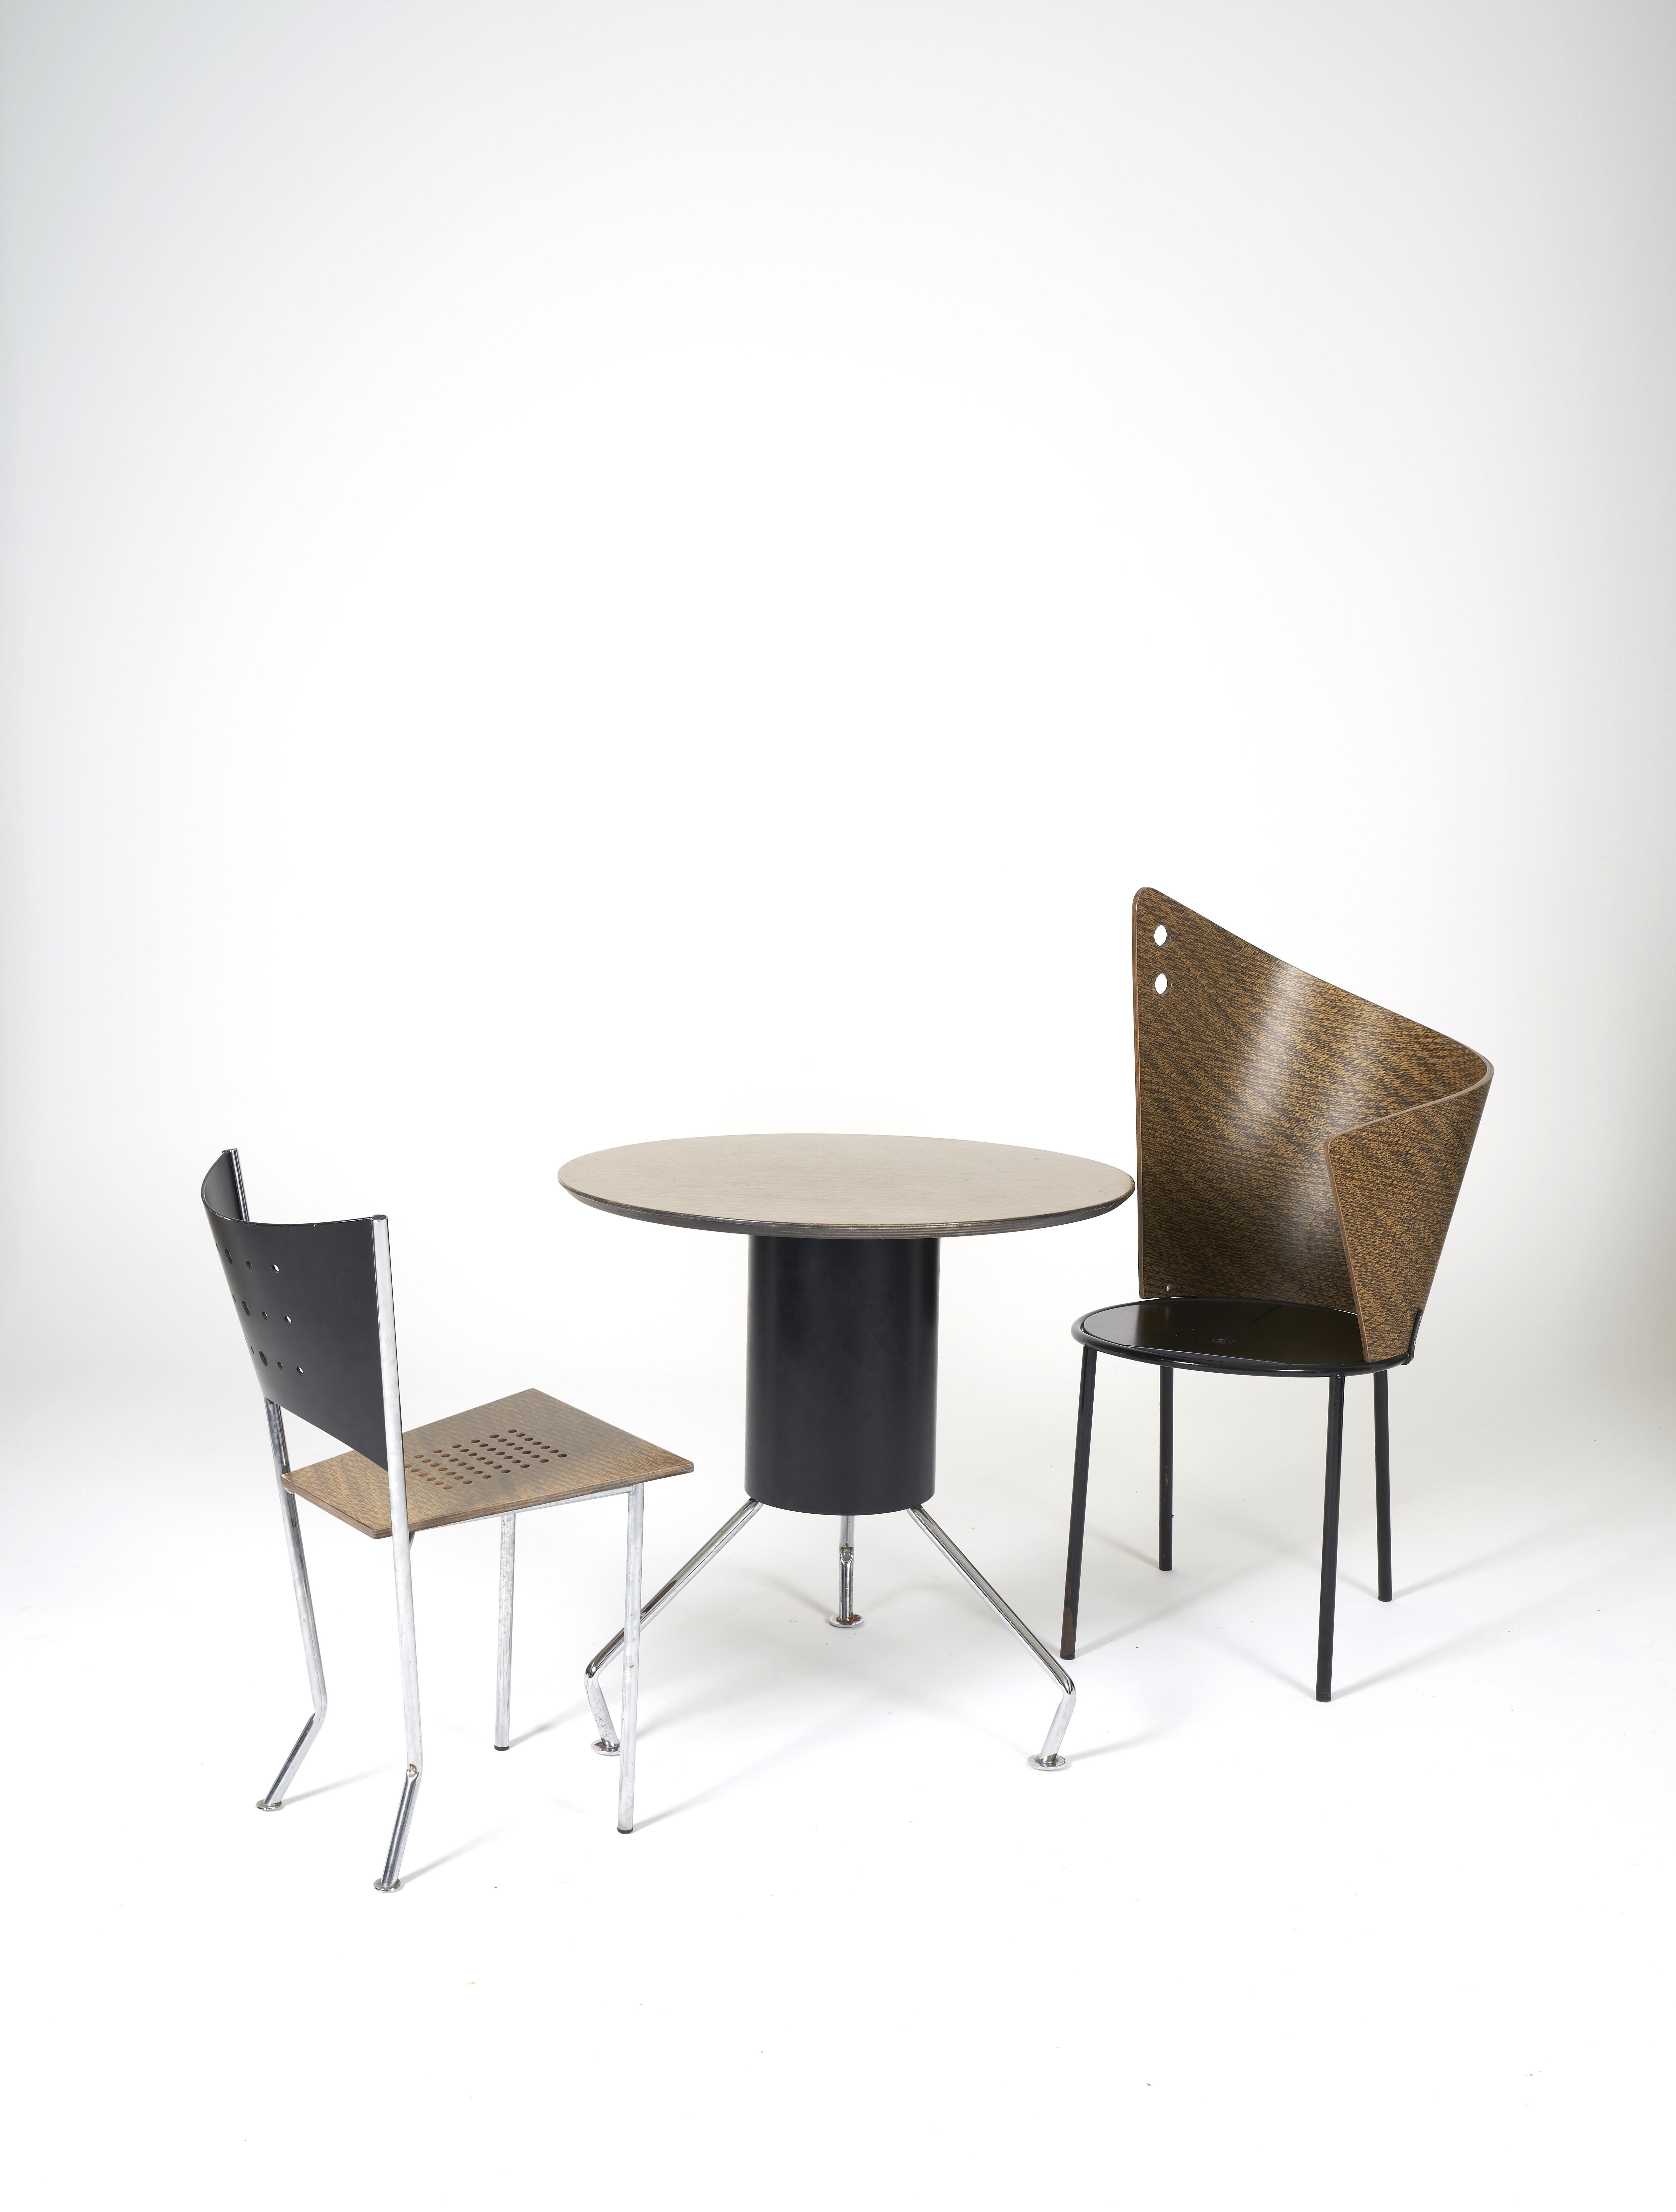 Set of a table and its two chairs 90s. Seats and backs of the chairs, table top in multi-ply wood and tubular steel structure in chrome or black lacquer. Sculptural and radical form for this unique set. Nice condition with some traces of use.